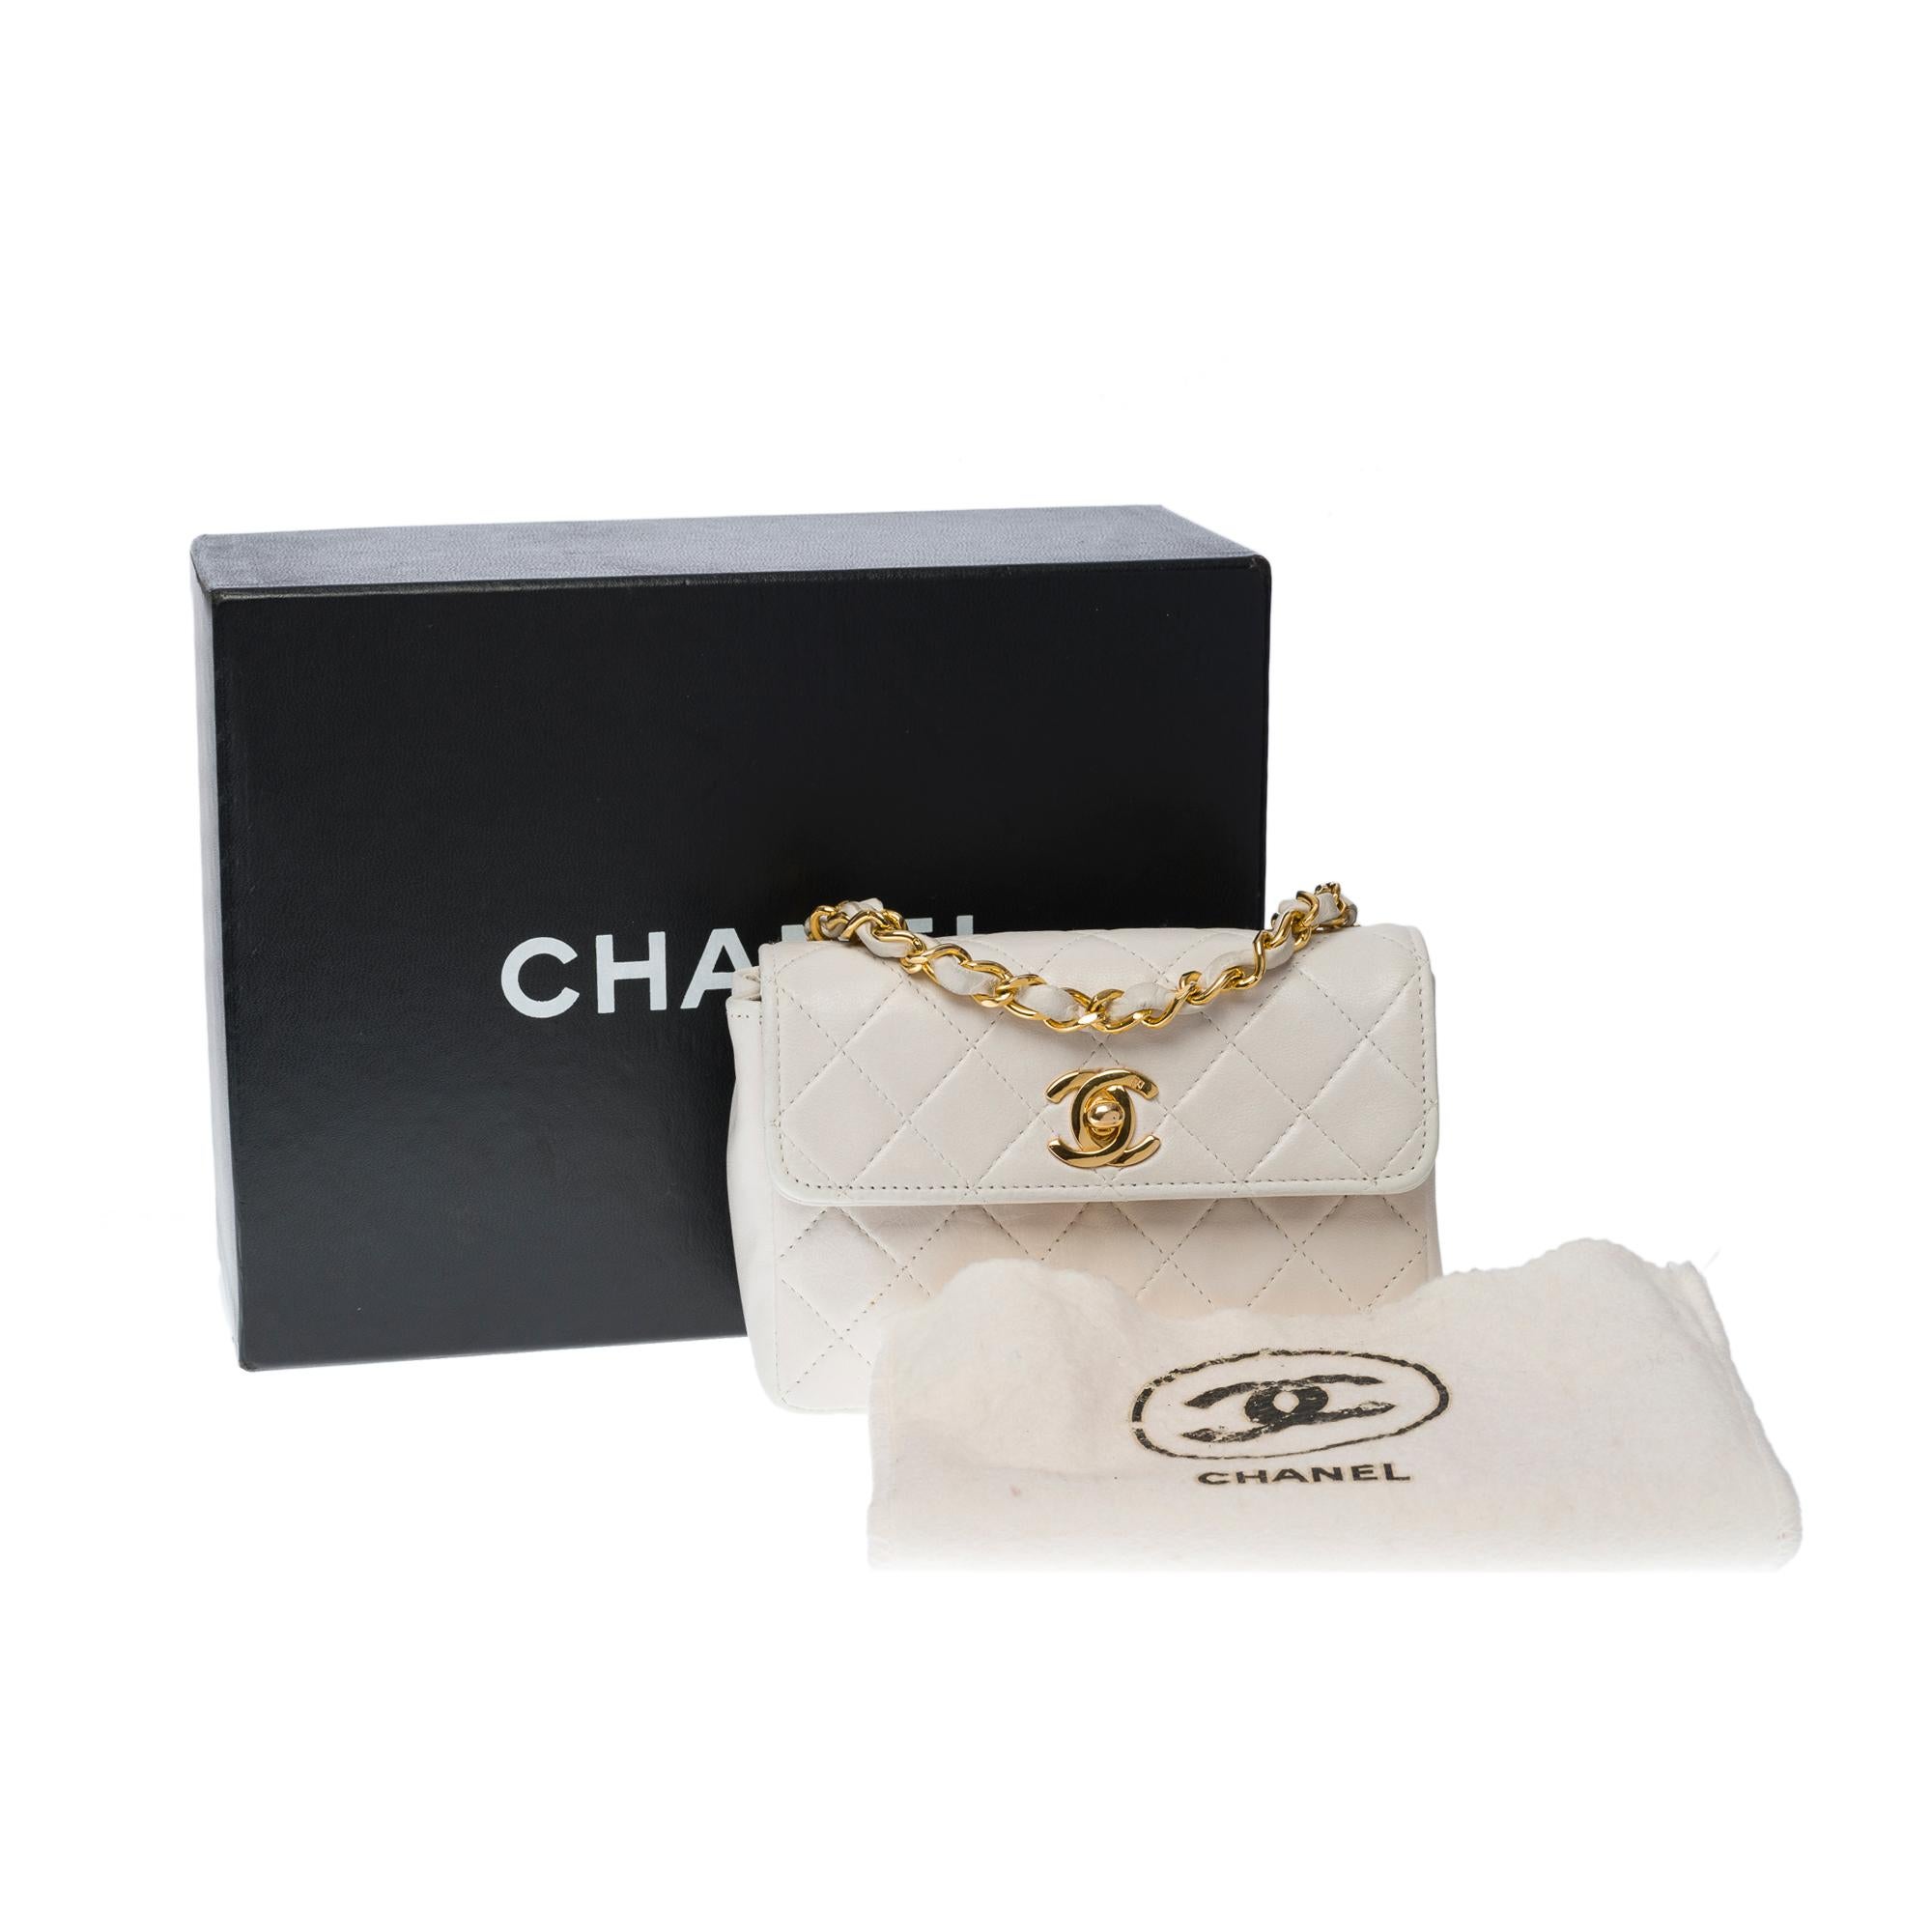 Gorgeous Chanel Mini Classic flap shoulder bag in White quilted lambskin,  GHW 6